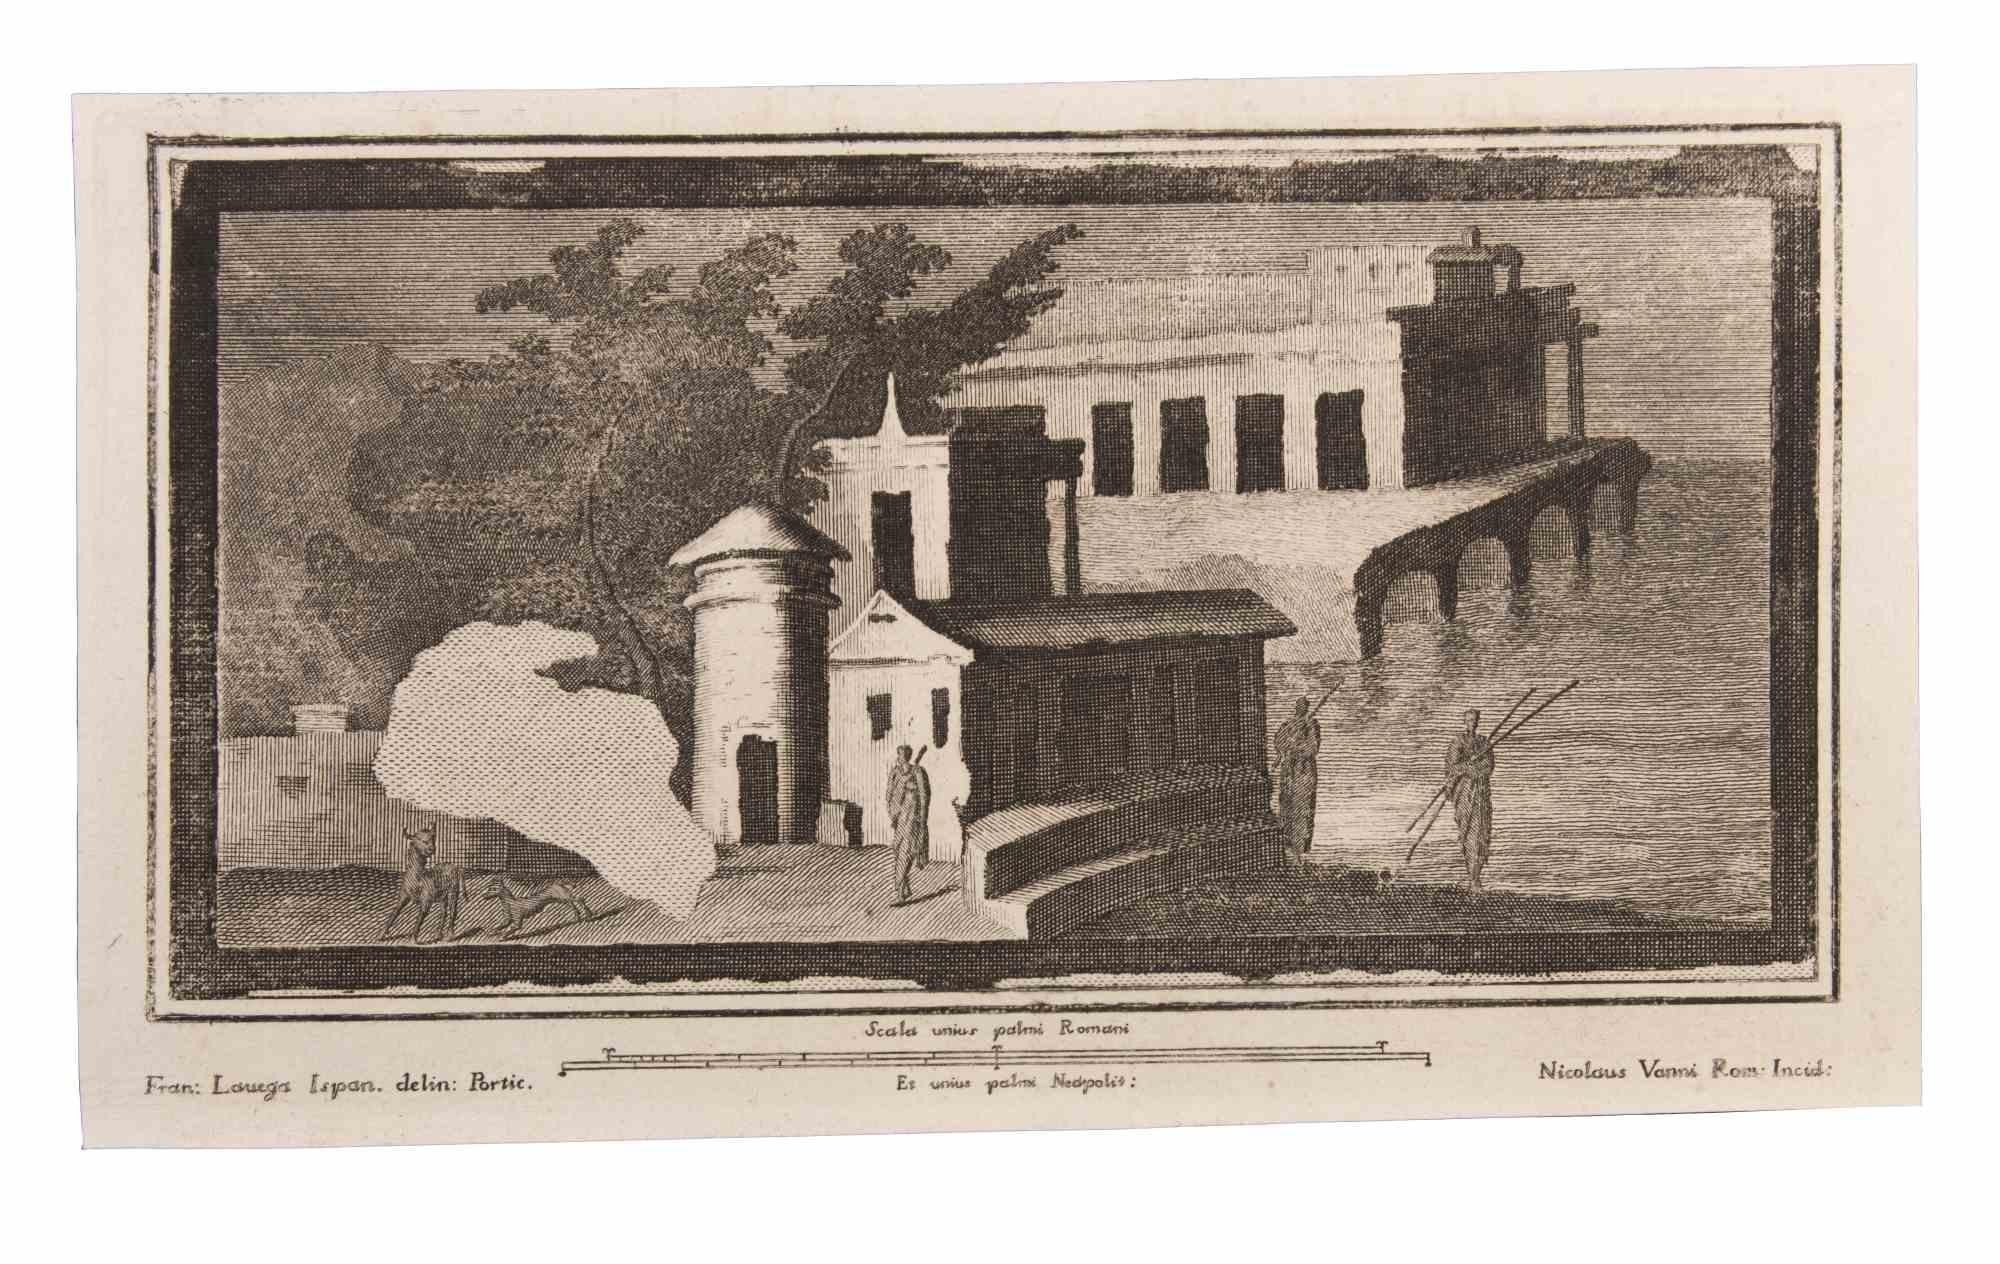 Seascape With Monument and Figures is an Etching realized by  Niccolò Vanni (1750-1770).

The etching belongs to the print suite “Antiquities of Herculaneum Exposed” (original title: “Le Antichità di Ercolano Esposte”), an eight-volume volume of